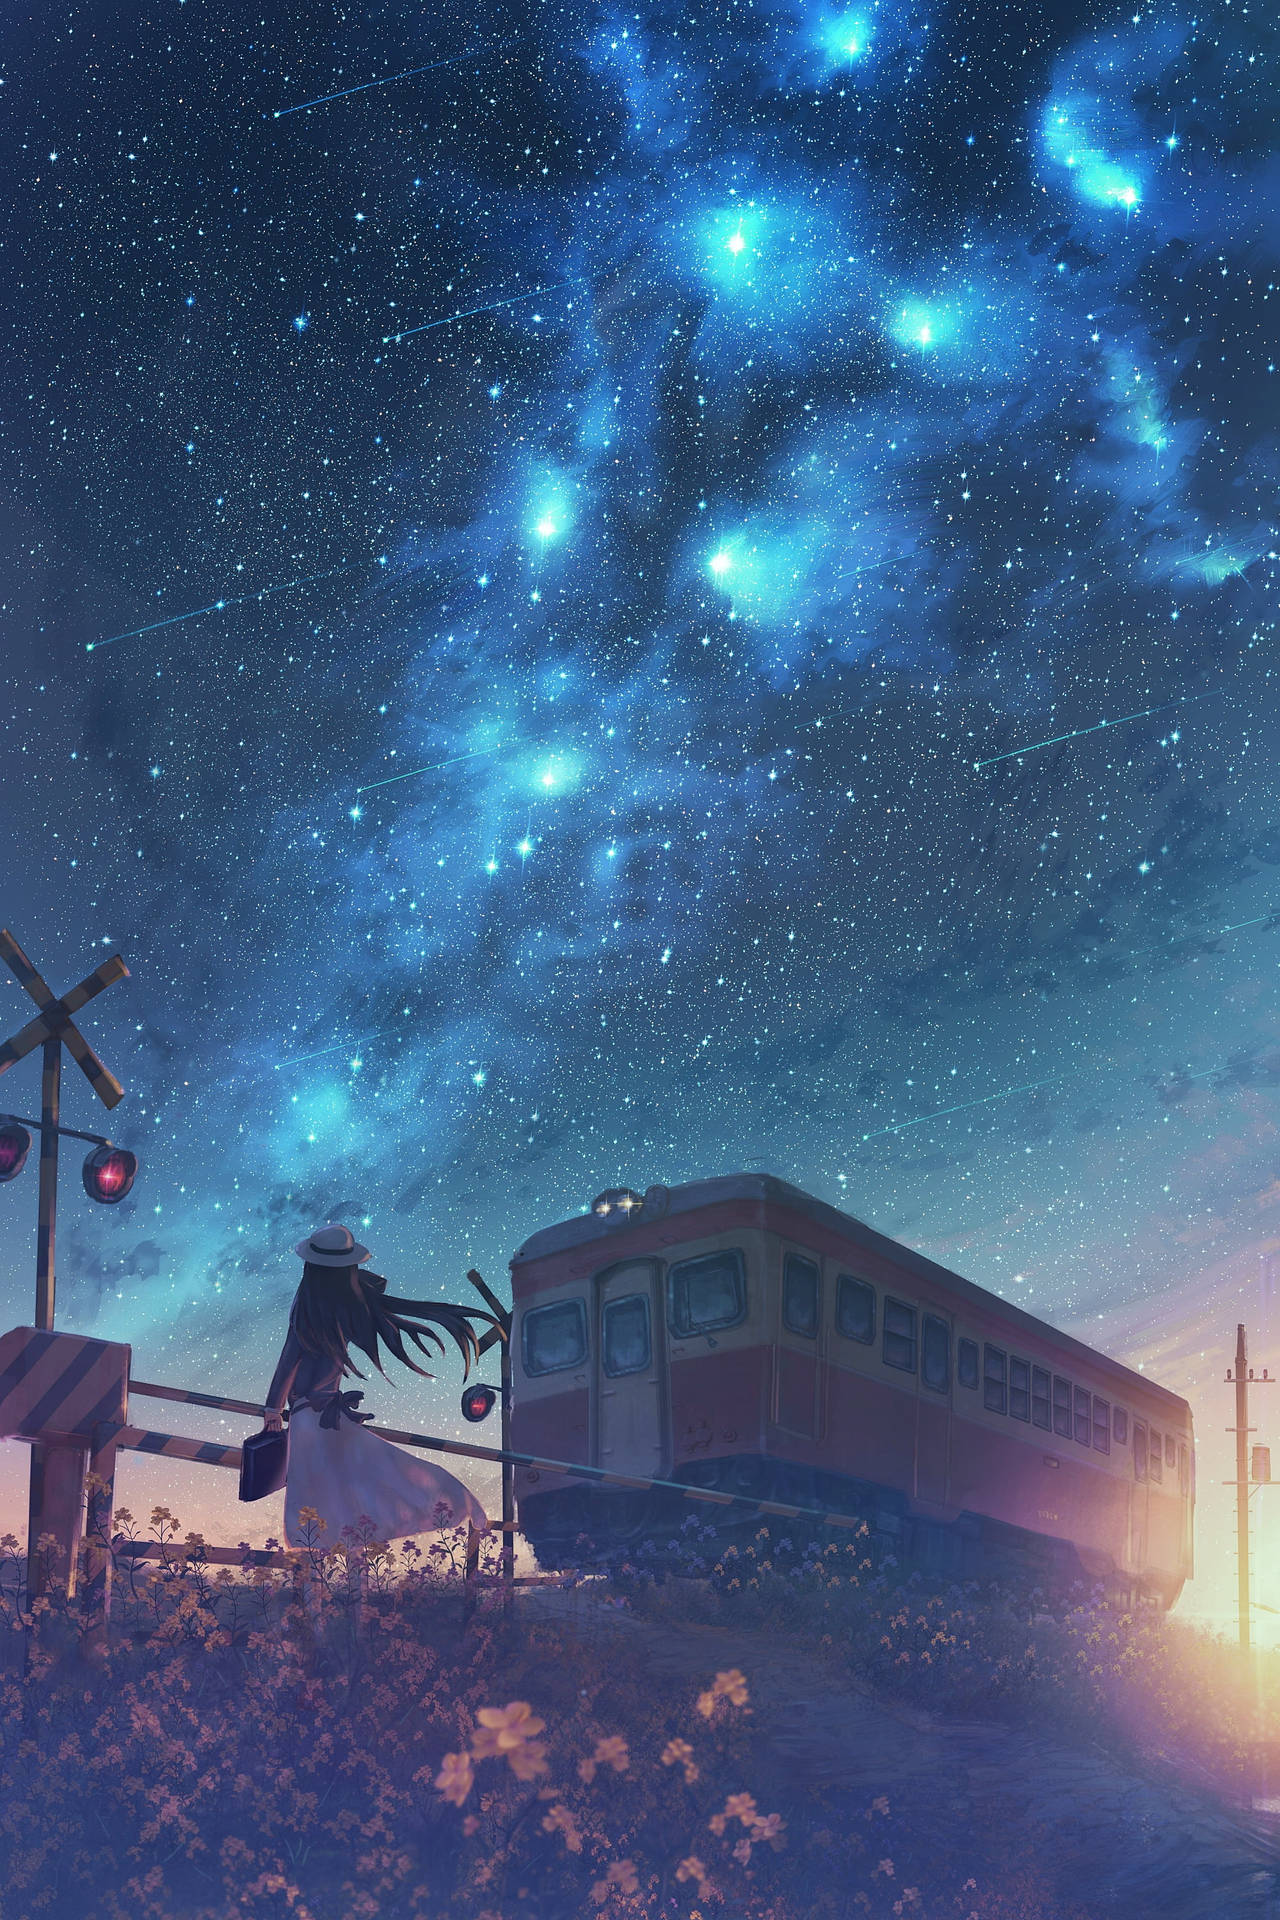 Woman And Train Galaxy Iphone Wallpaper